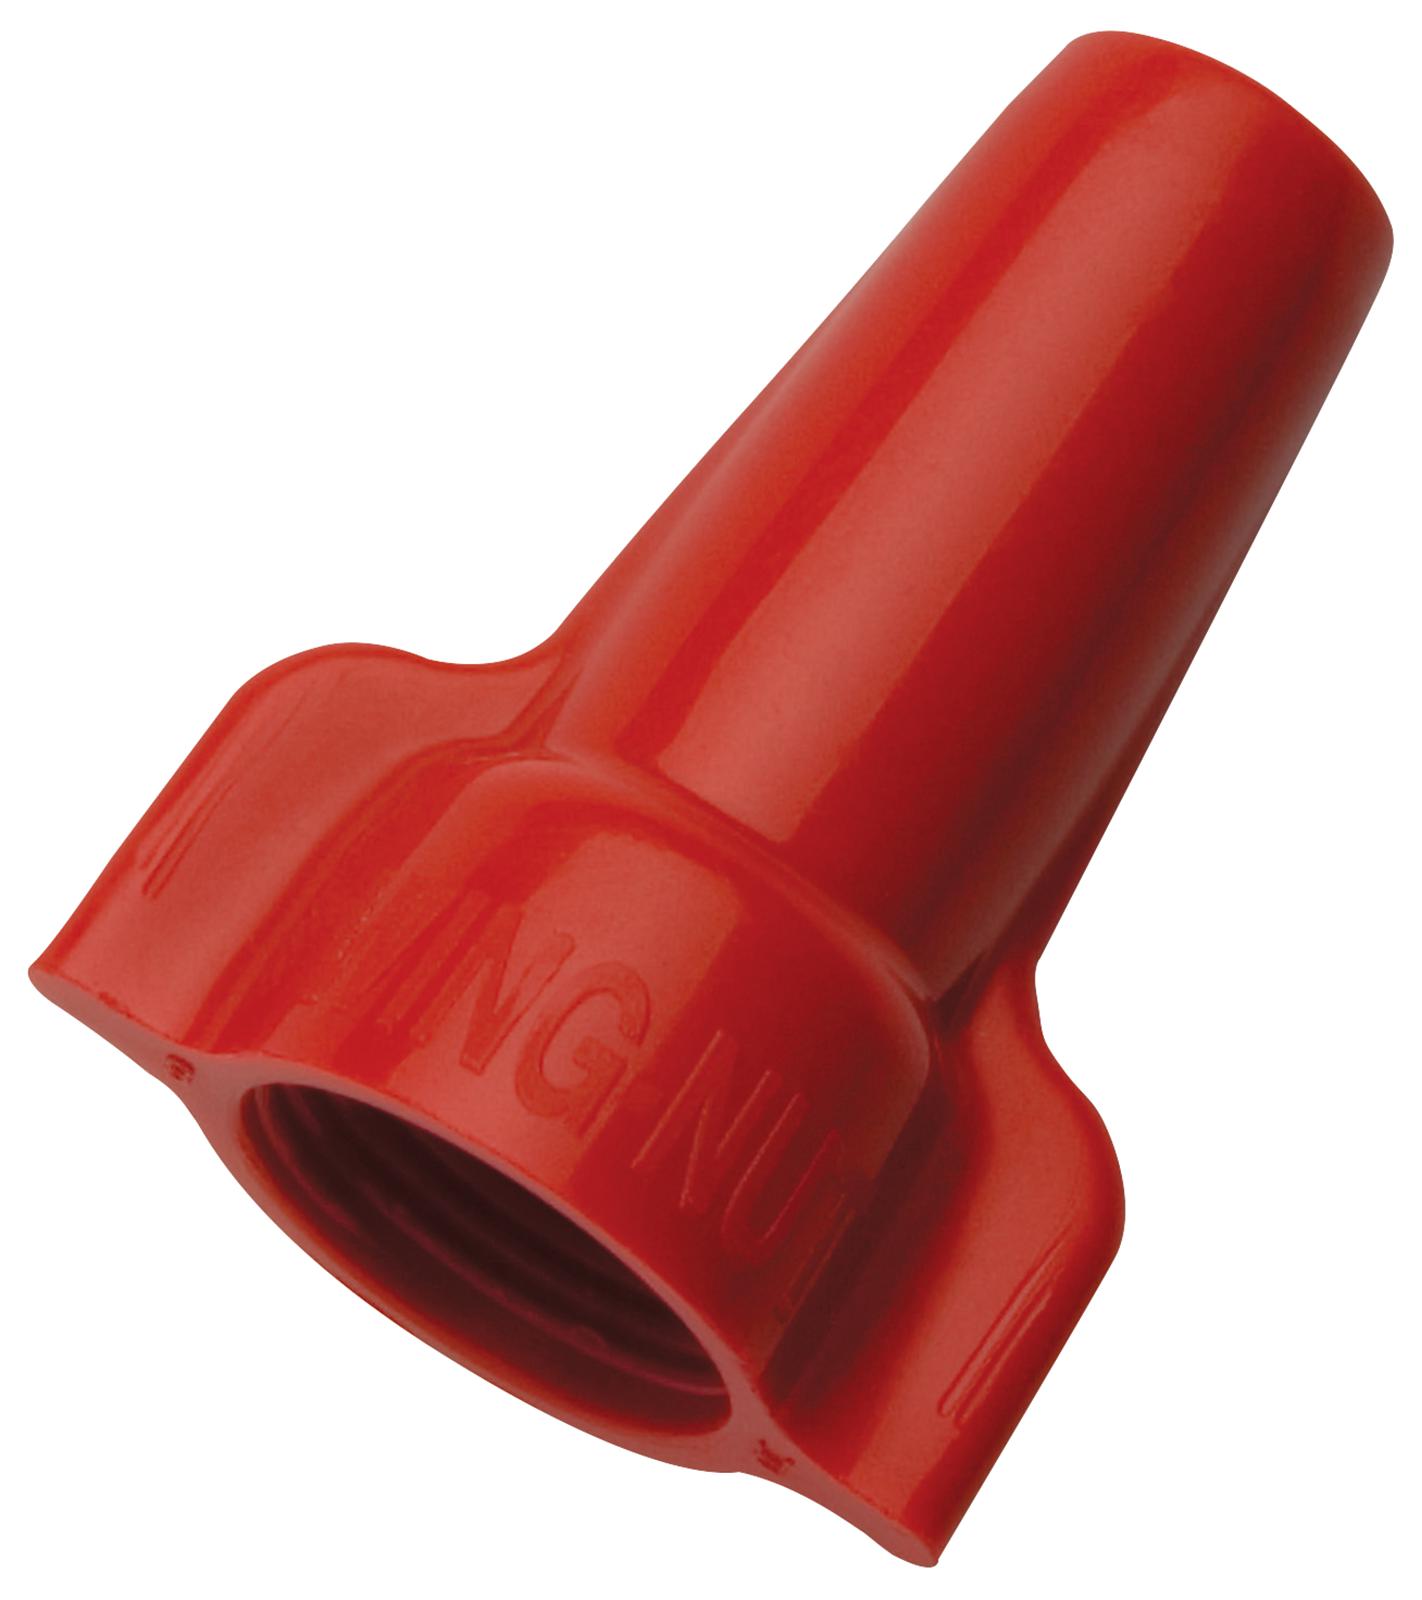 Ideal 30-452 Wing-Nut Wire Connectors, Red, 100Pk